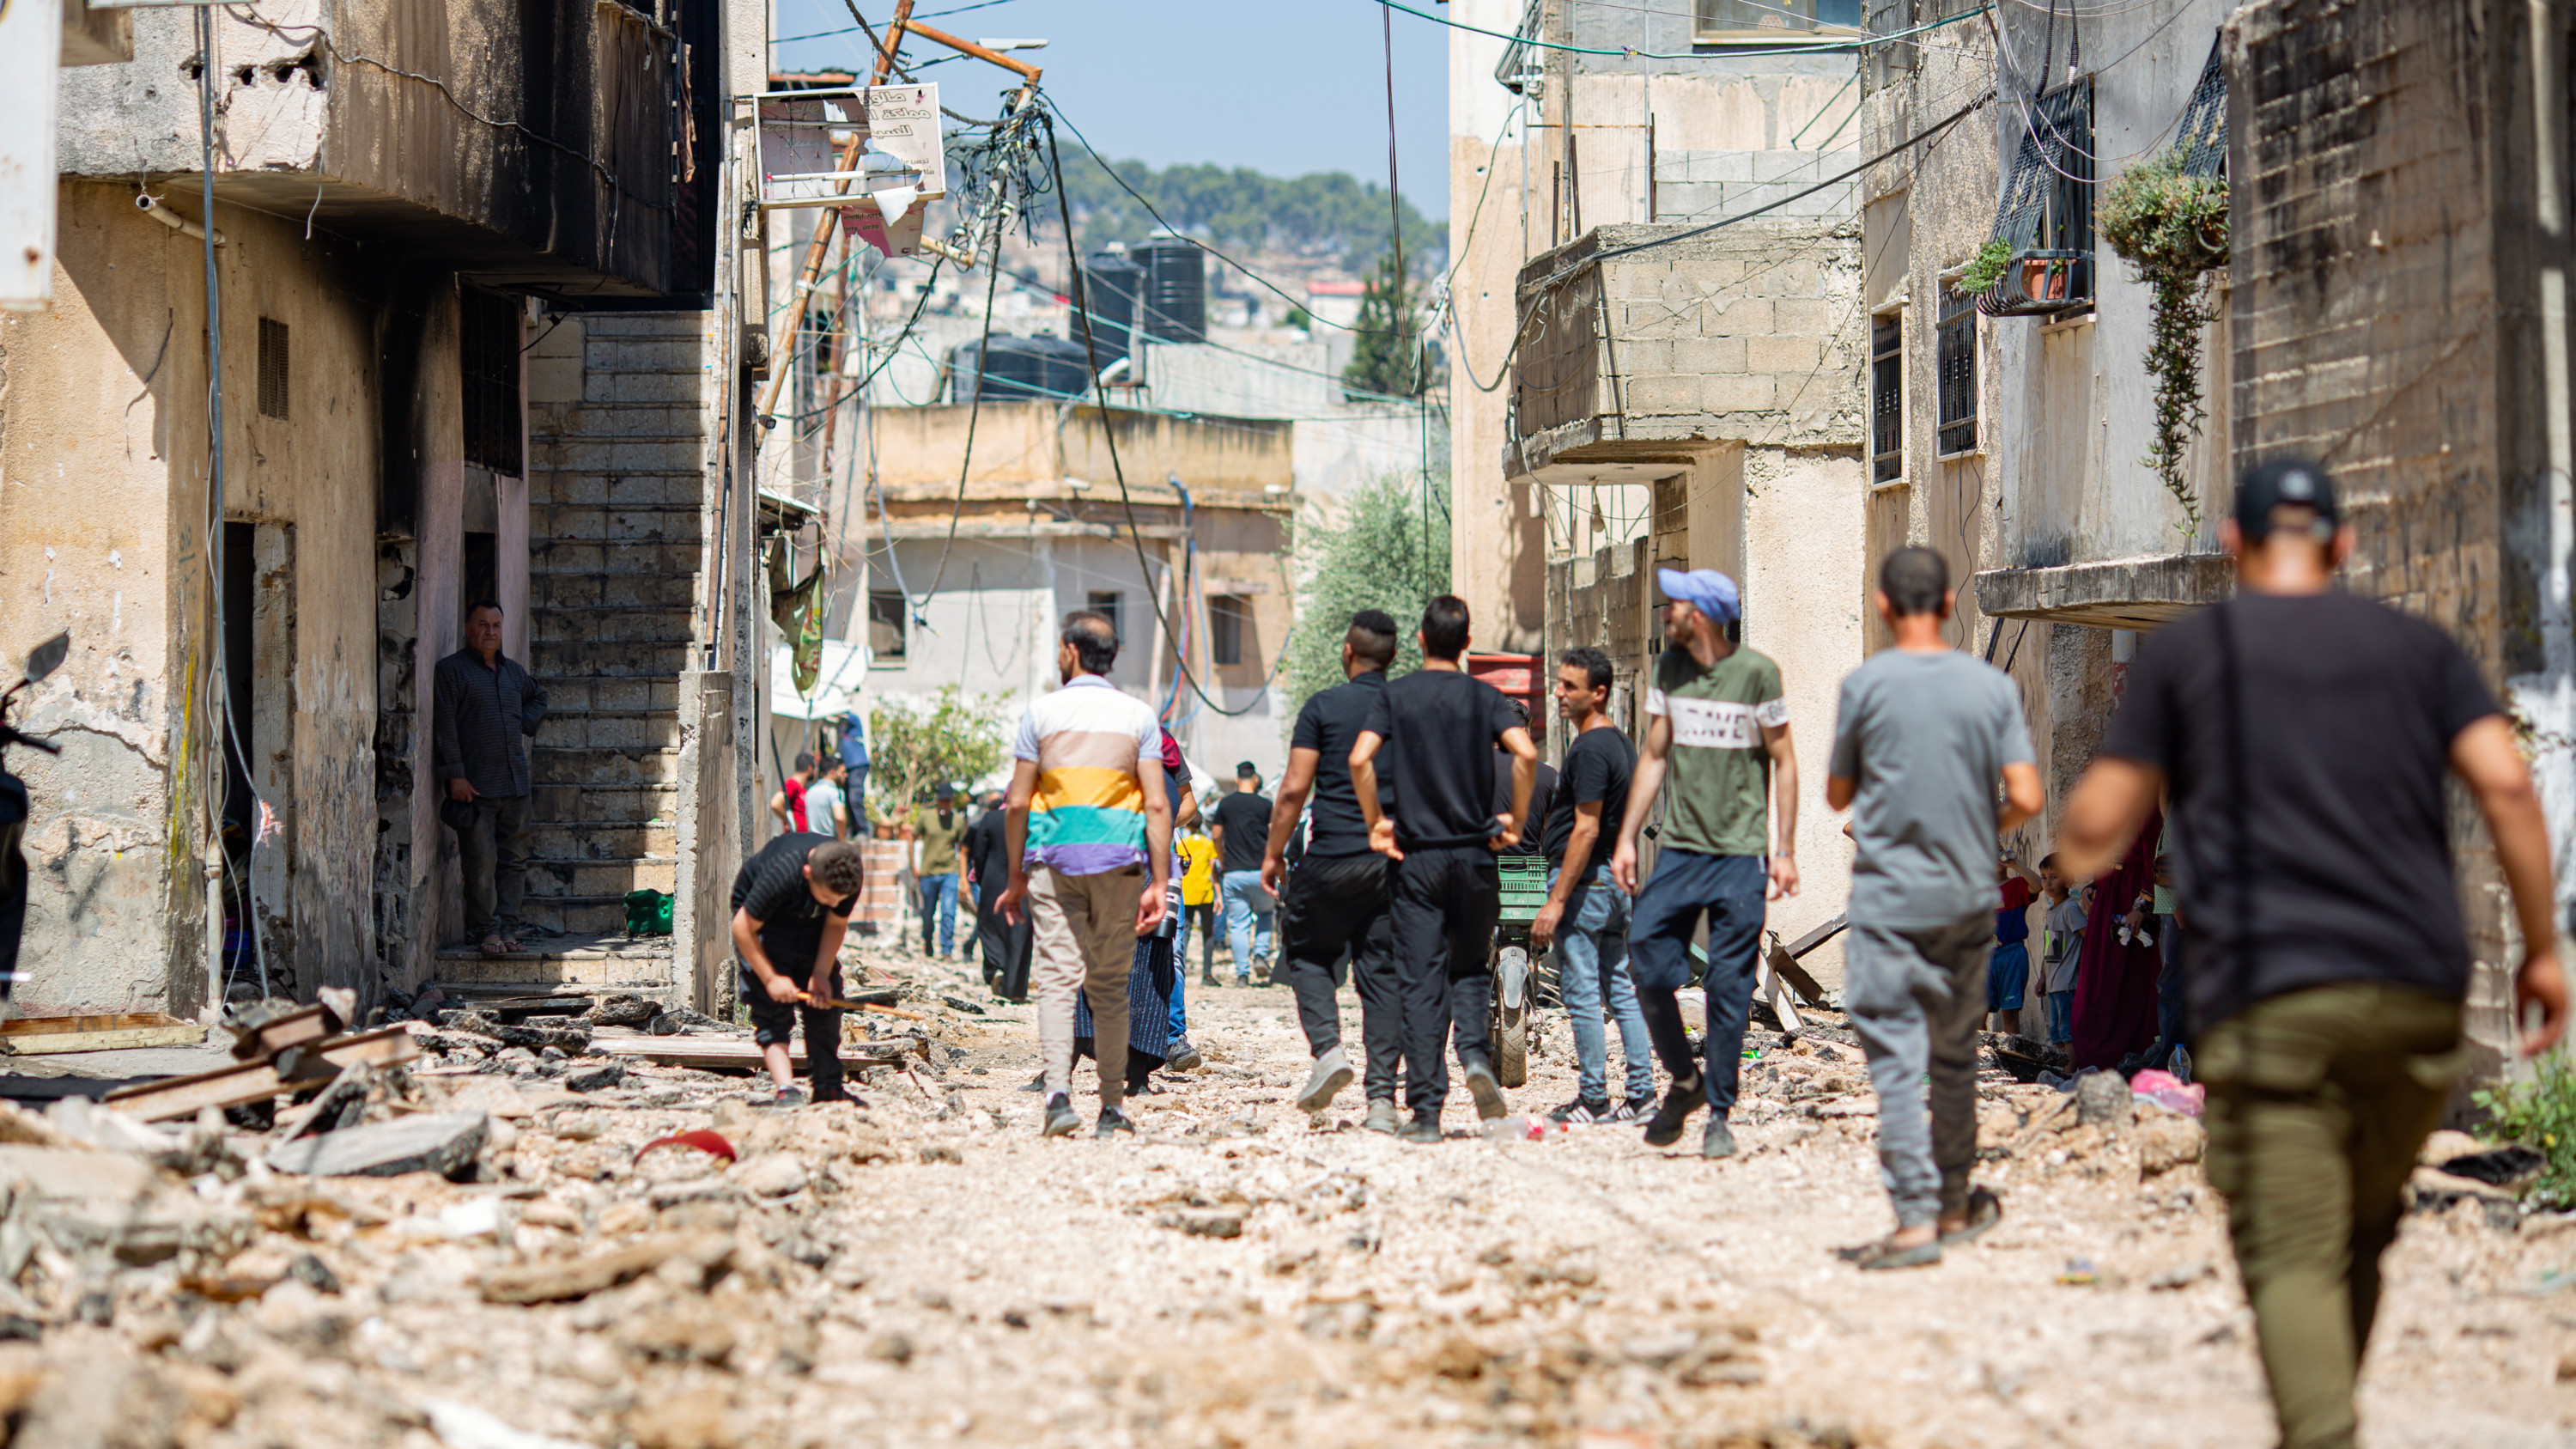 The streets of Jenin have been reduced to ruble as as Israel undertook one of its largest assaults on the city in 20 years (MEE/Latifeh Abdellatif)